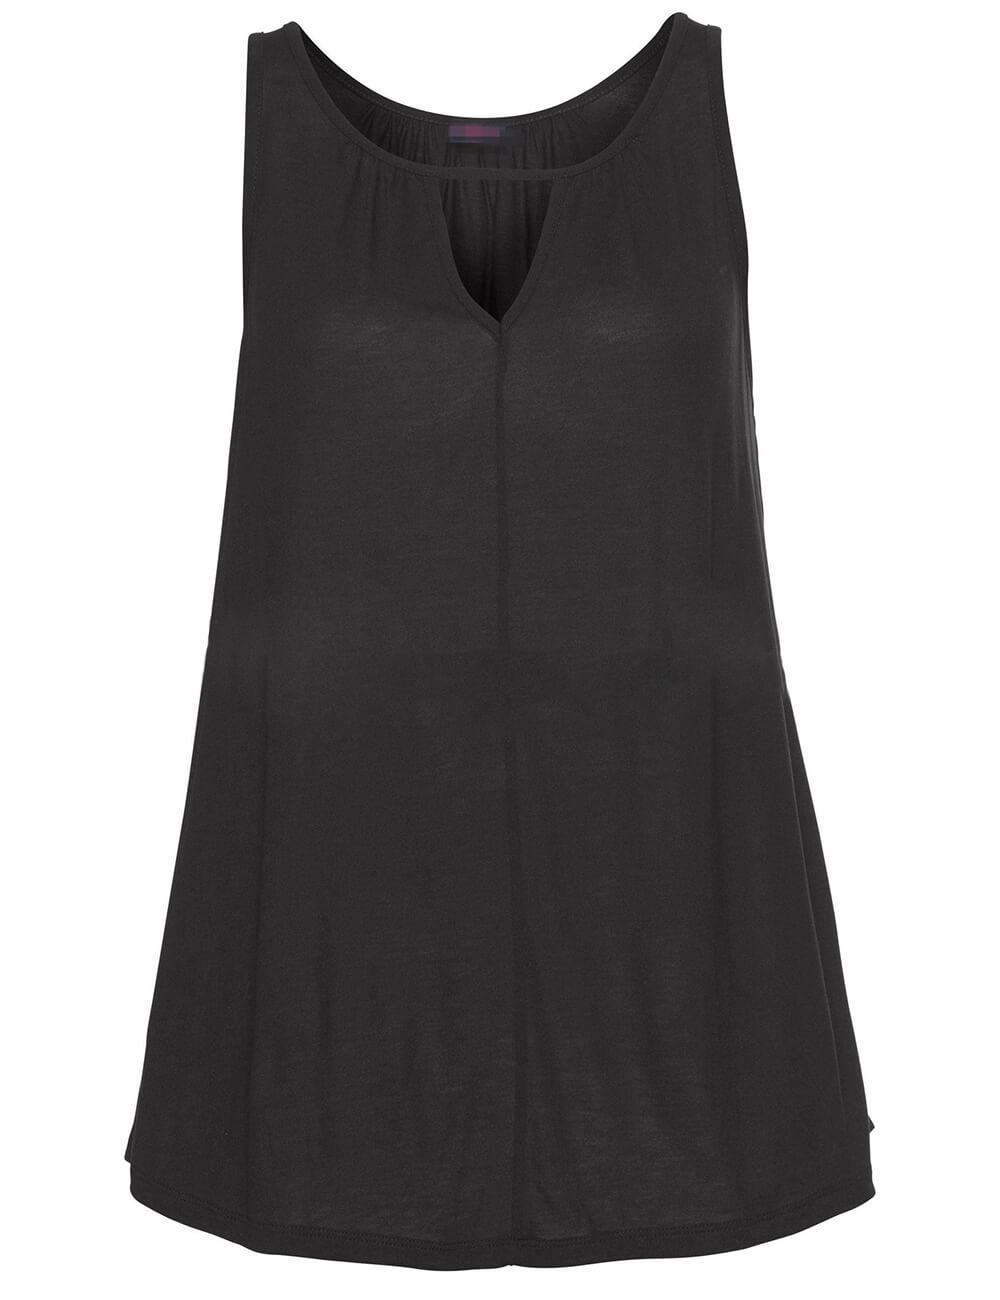  Women's Solid Sleeveless Sexy V Neck Summer Beach Cove Up Sleepwear Casual Vest Camisole Tunic Tank Top